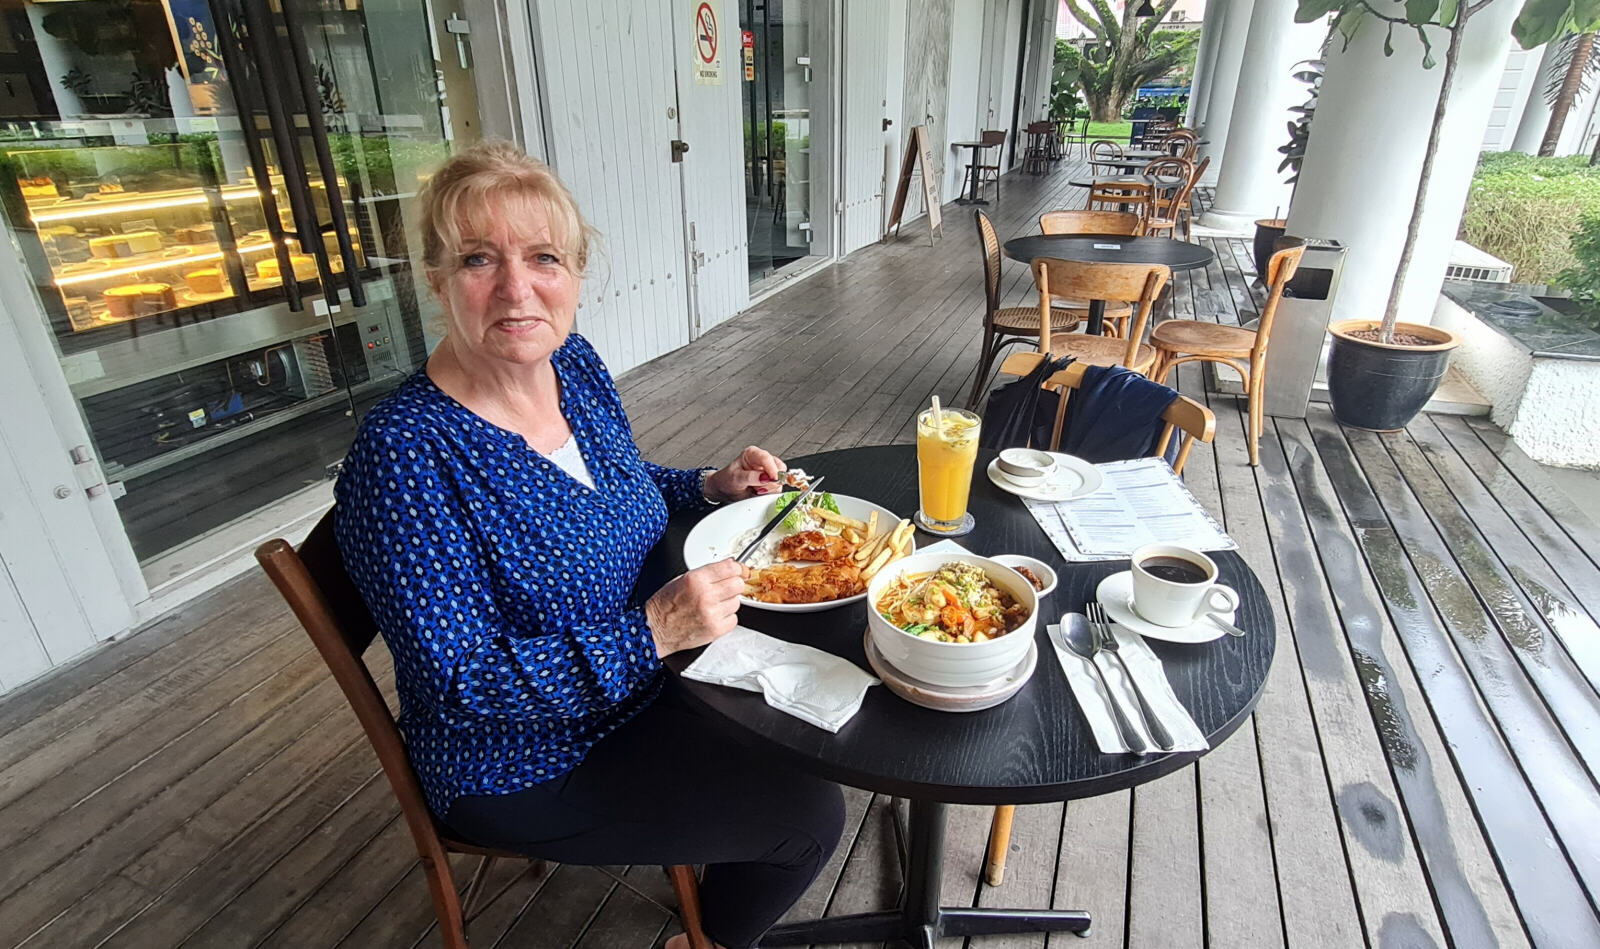 Laksa noodles at Commons restaurant in Kuching